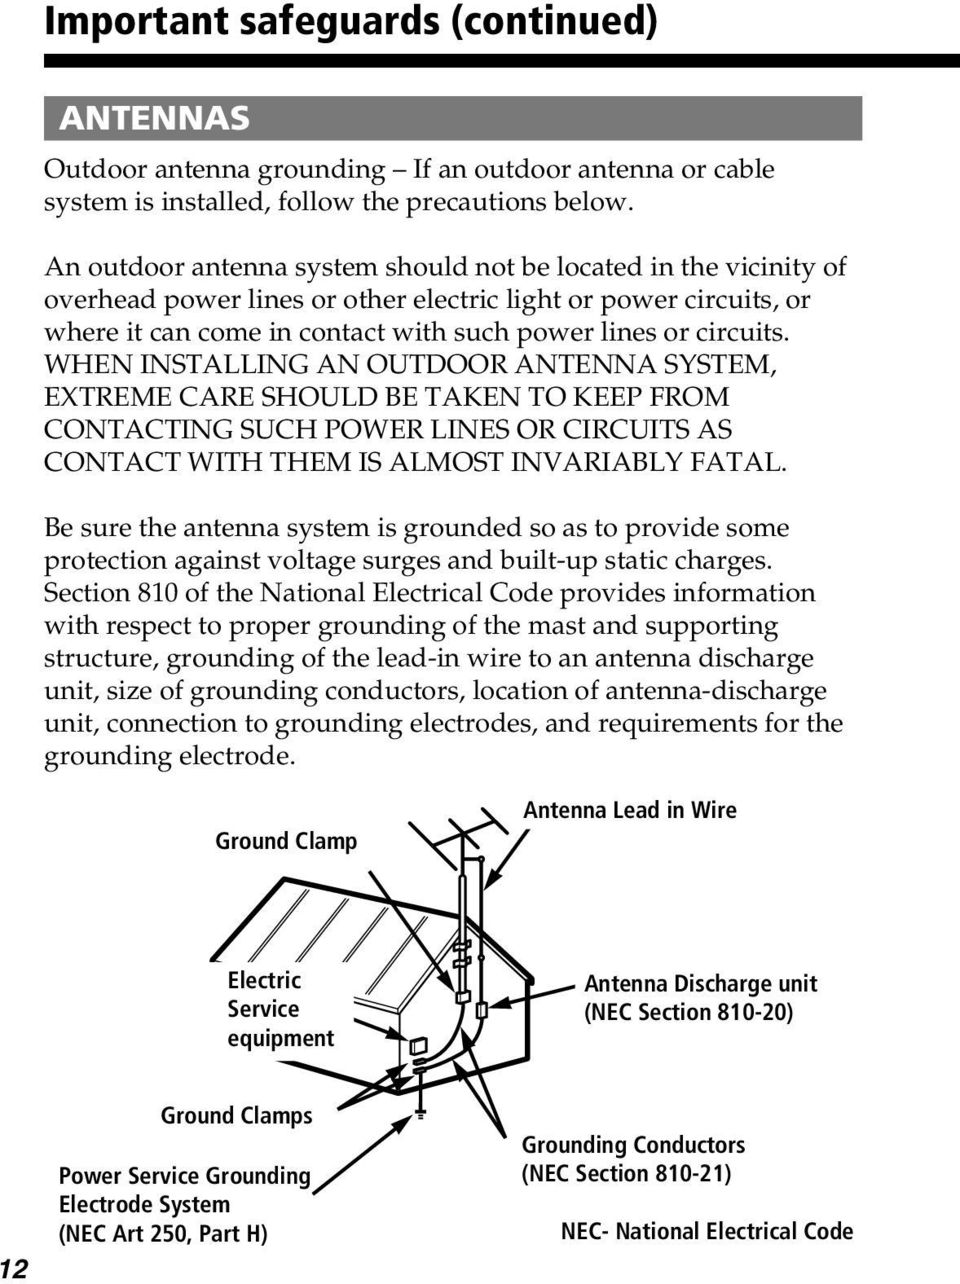 WHEN INSTALLING AN OUTDOOR ANTENNA SYSTEM, EXTREME CARE SHOULD BE TAKEN TO KEEP FROM CONTACTING SUCH POWER LINES OR CIRCUITS AS CONTACT WITH THEM IS ALMOST INVARIABLY FATAL.